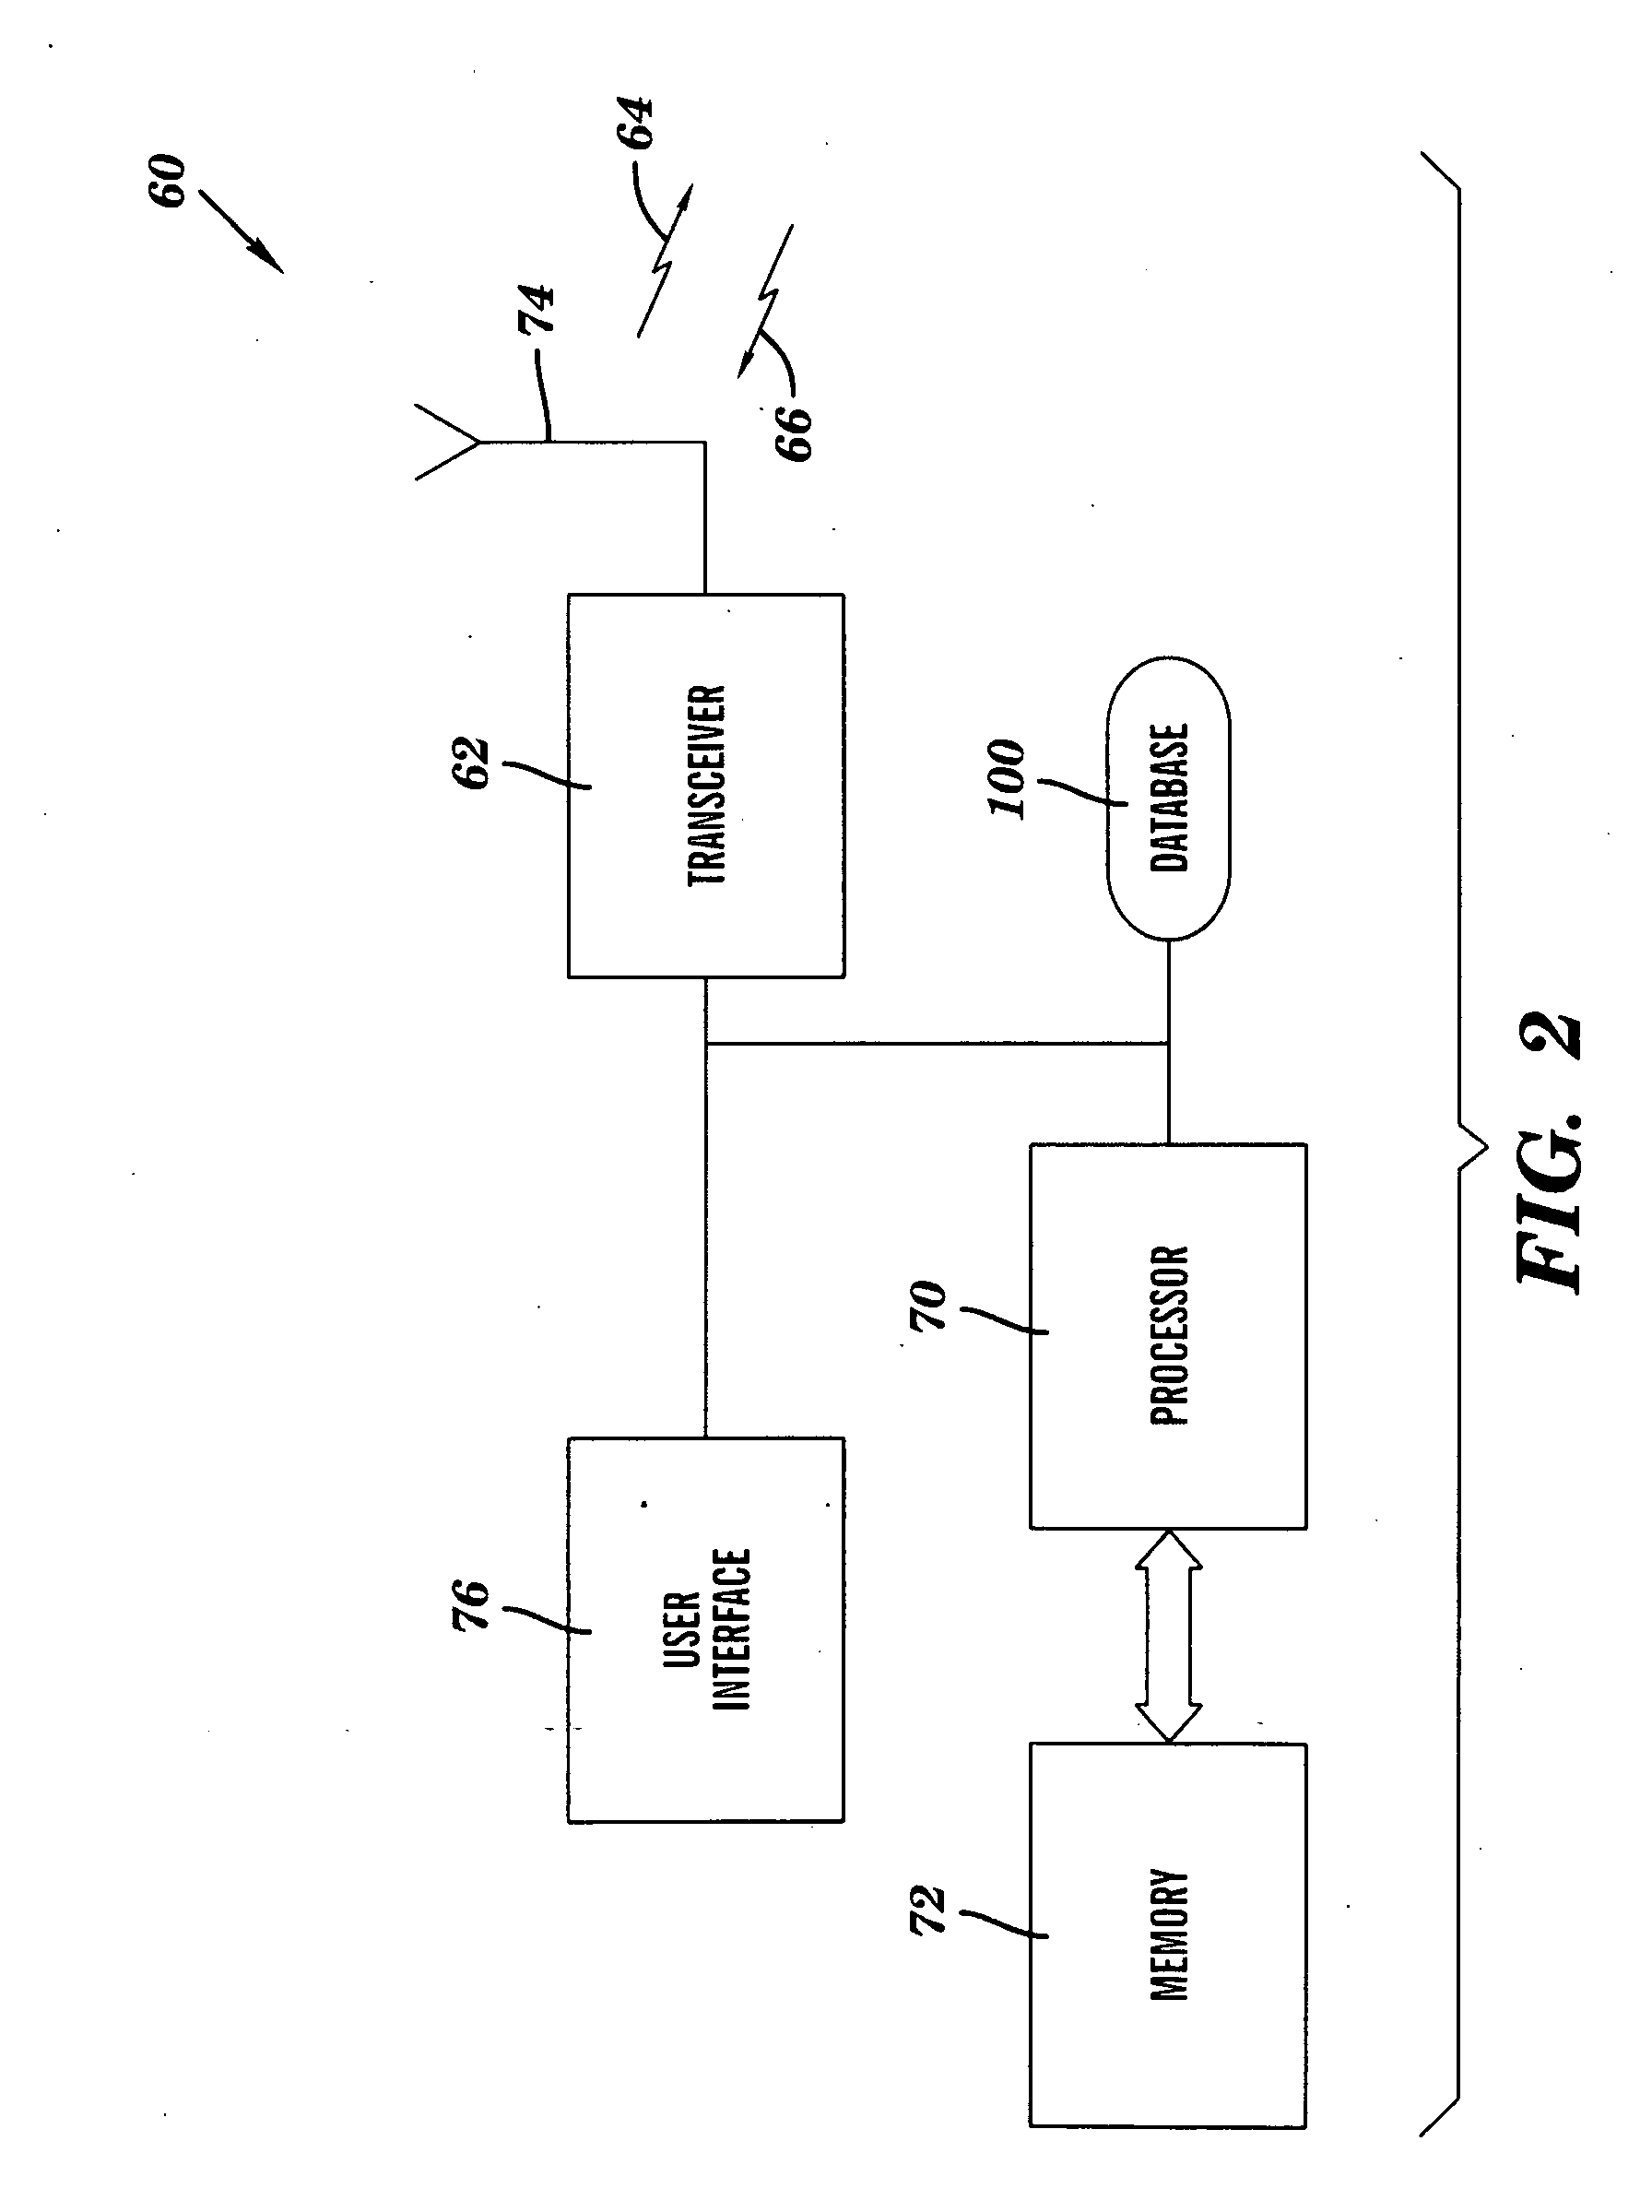 Systems and methods for permitting movement of an object outside a predetermined proximity distance threshold